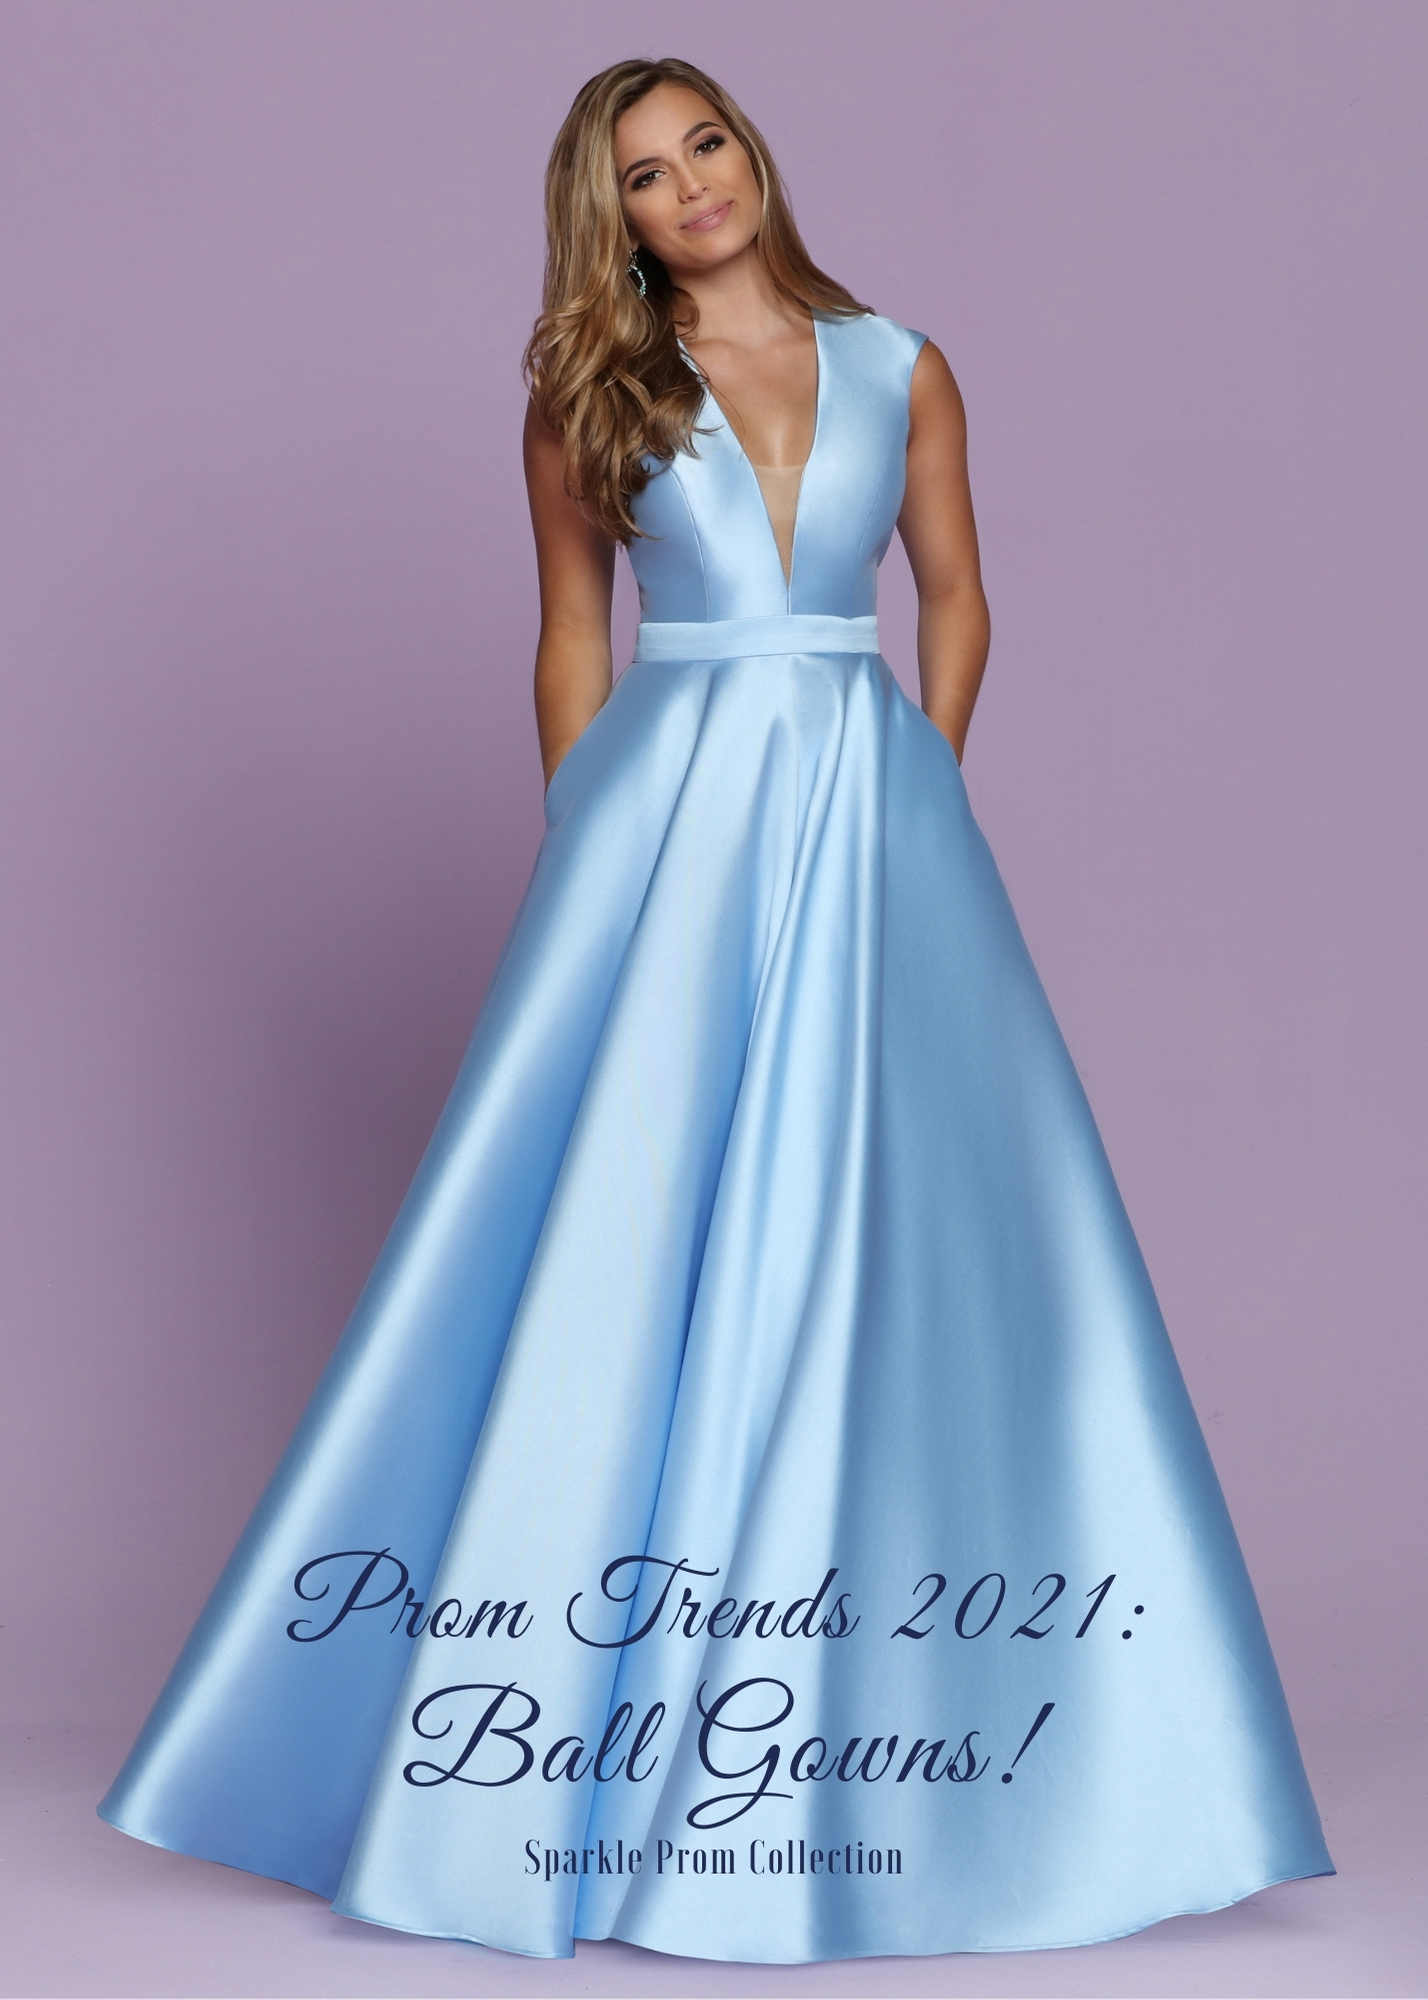 2021 Prom Dress Trends Ball Gowns – Sparkle Prom